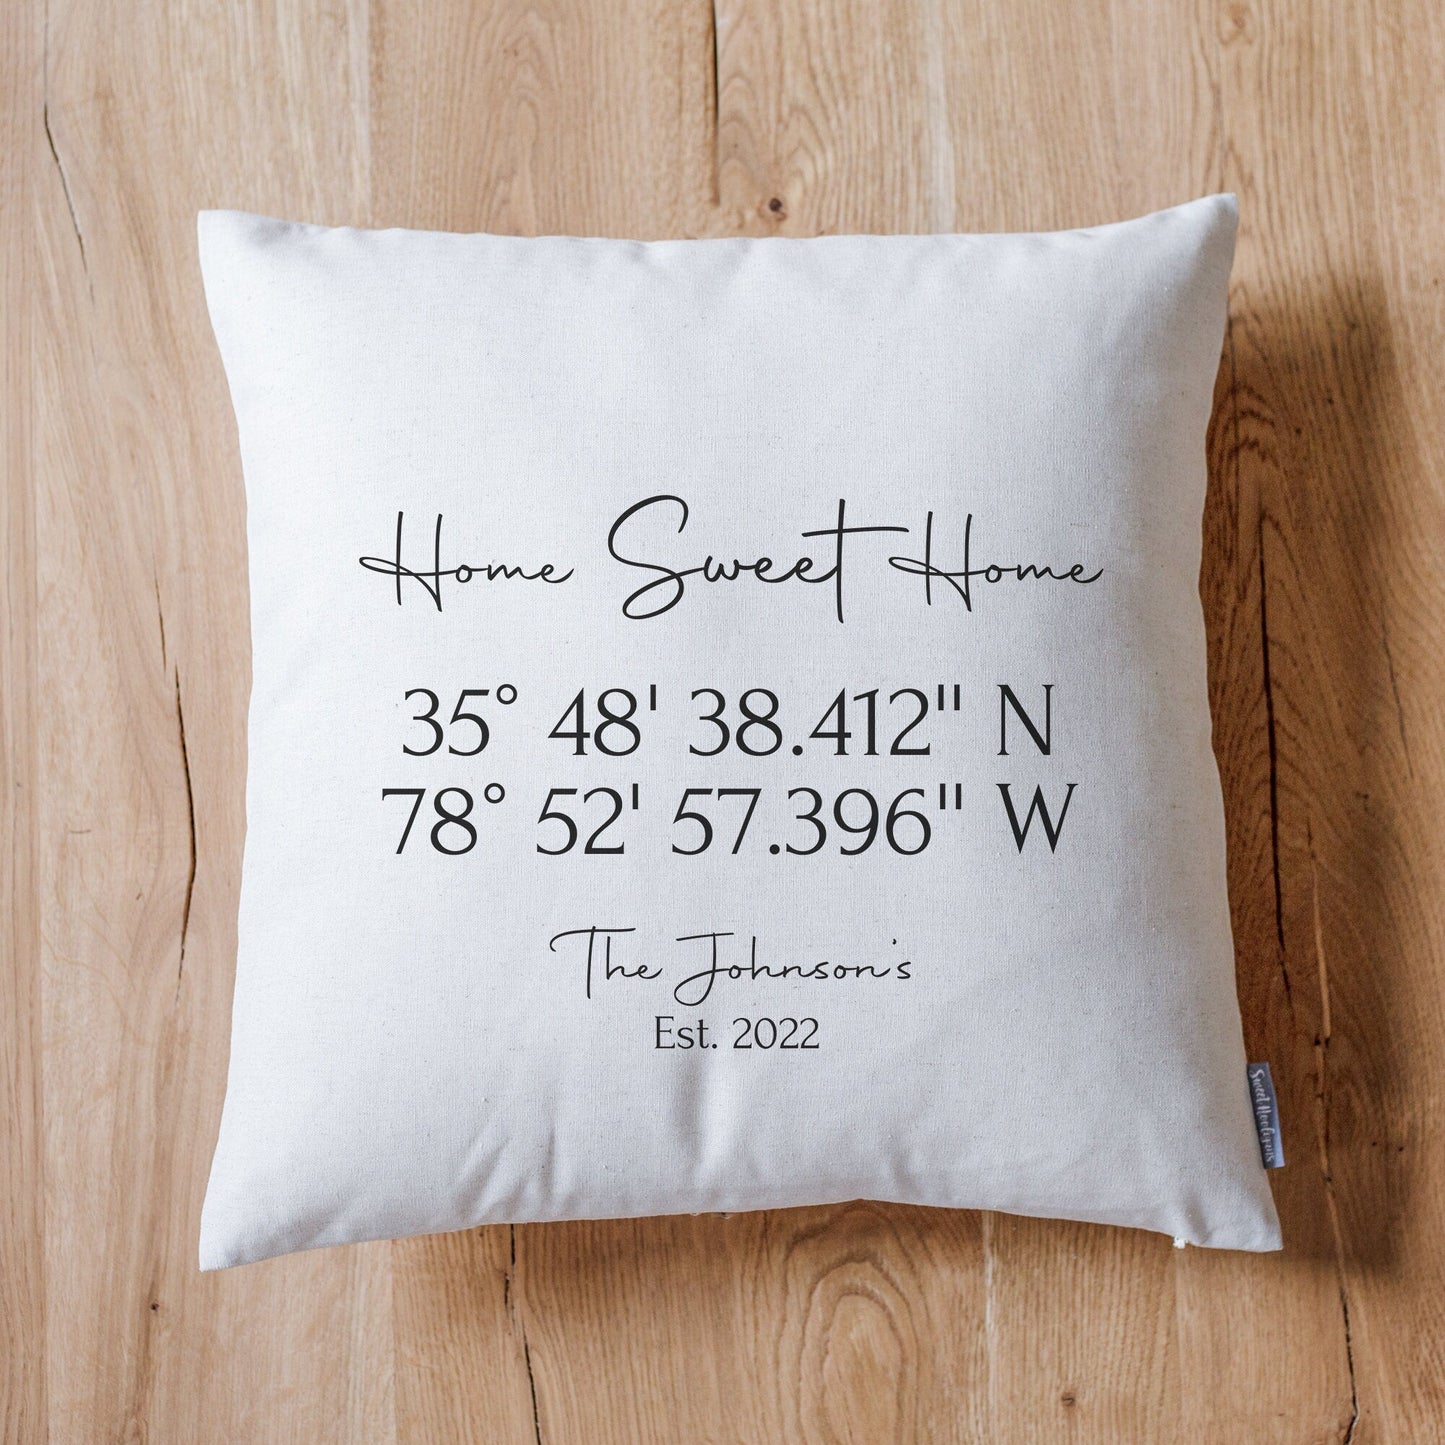 Load image into Gallery viewer, Home Sweet Home Pillow Gift | New Home Housewarming Gift | New Couple Gift | Latitude Longitude Pillow | GPS Coordinates | Lat Long Pillow
